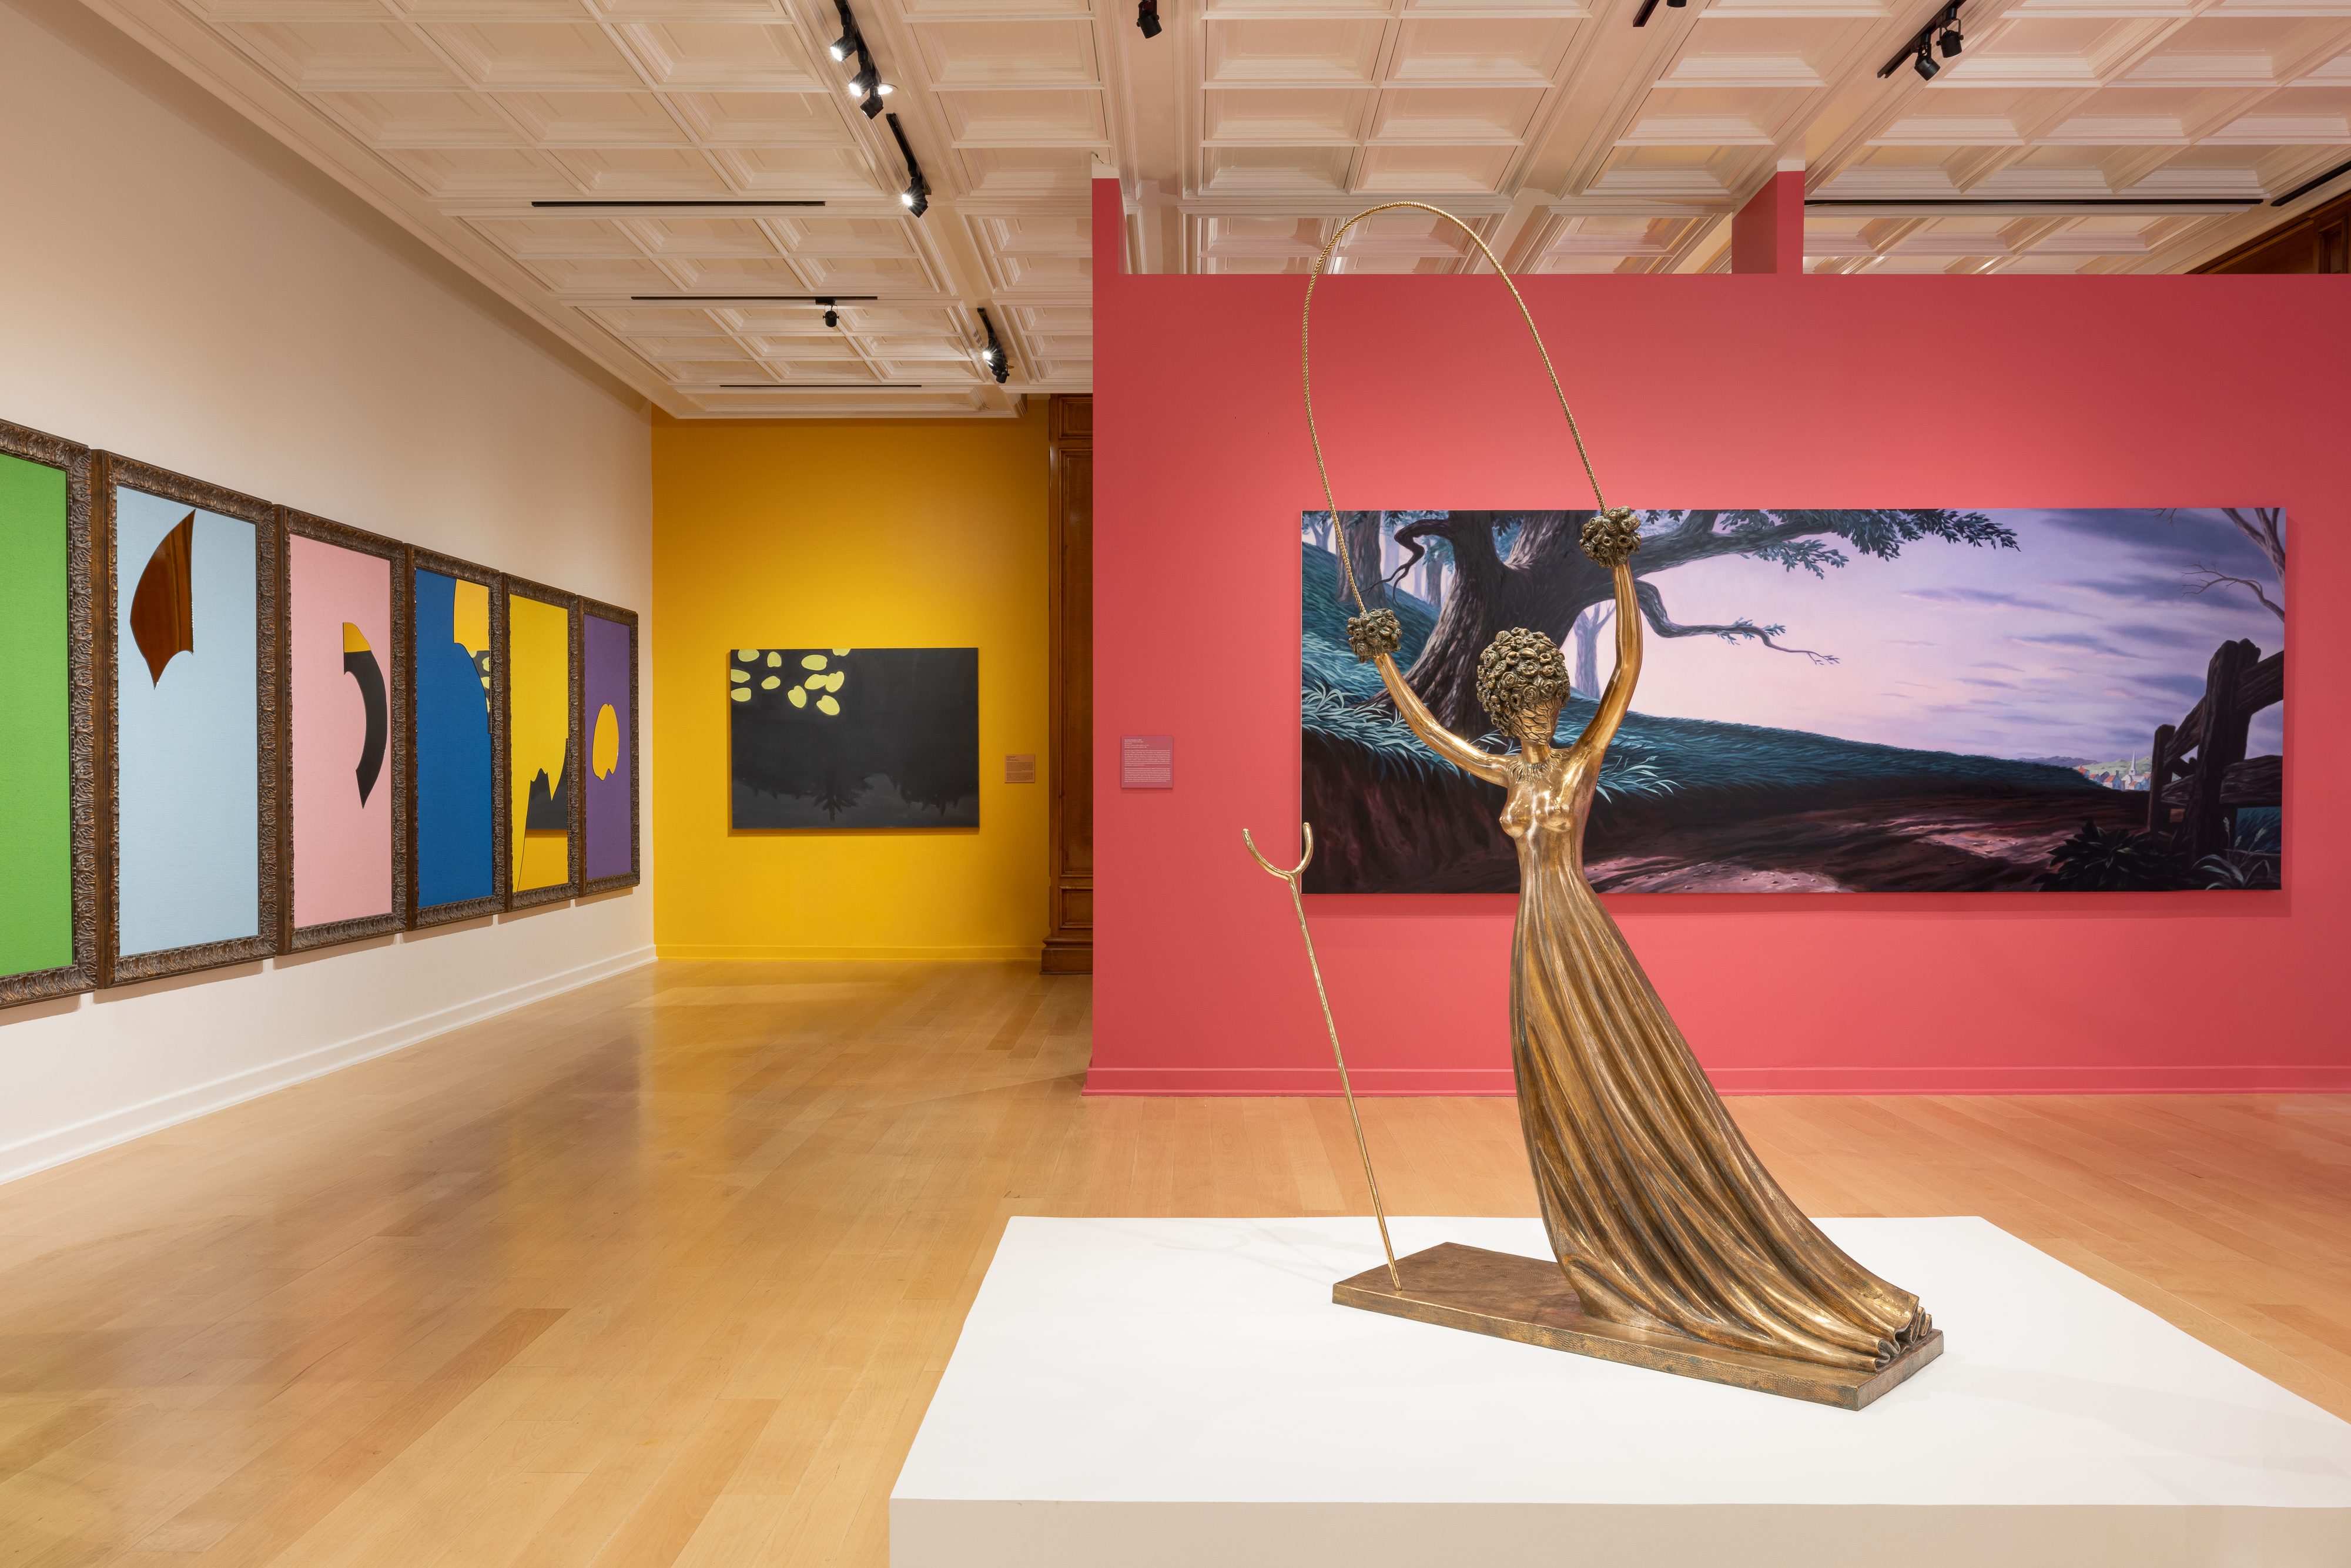 Installation_View_of_Salvador_Dalí,_Colen,_Katz,_and_Pistoletto_from_In_Bloom,_2023,_Courtesy_of_Bellagio_Gallery_of_Fine_Art.jpg